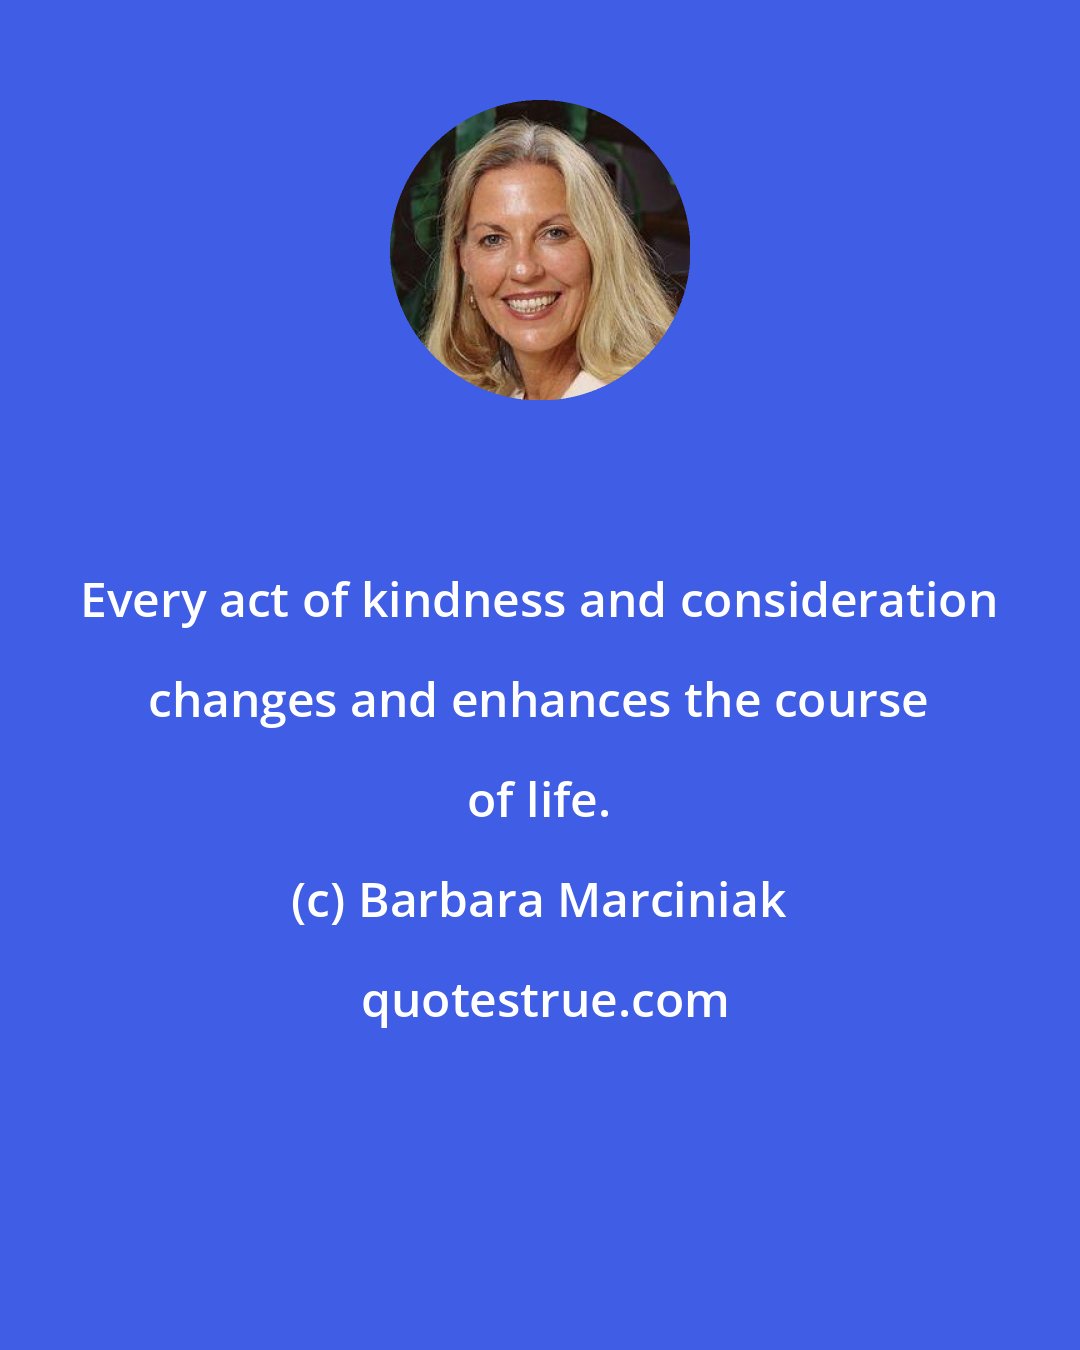 Barbara Marciniak: Every act of kindness and consideration changes and enhances the course of life.